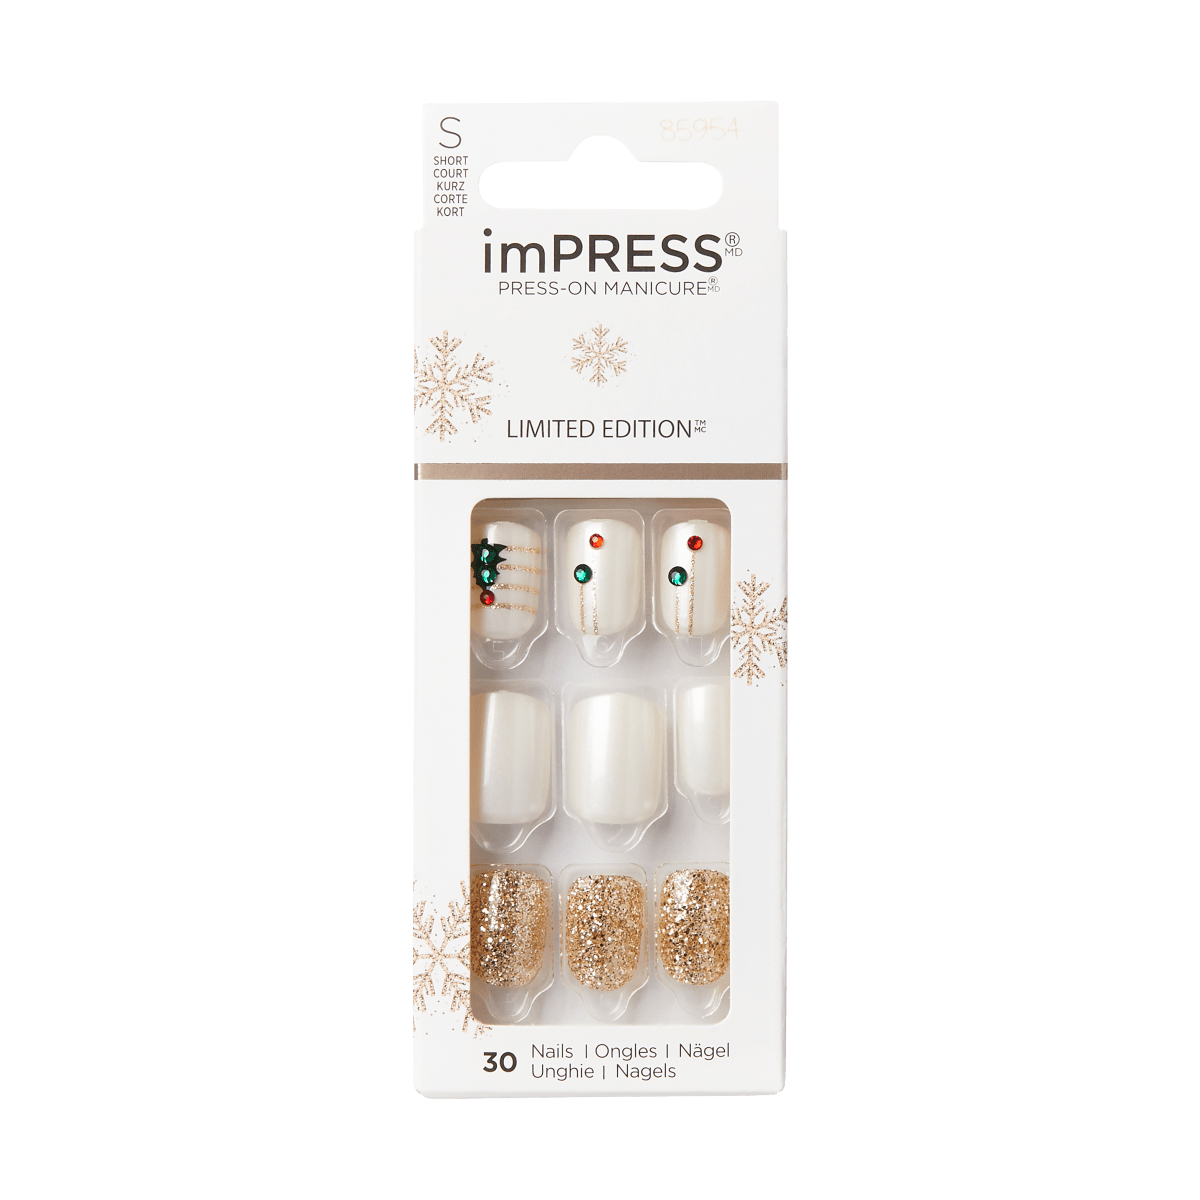 imPRESS Press-On Manicure Limited Edition Holiday - Snowfall